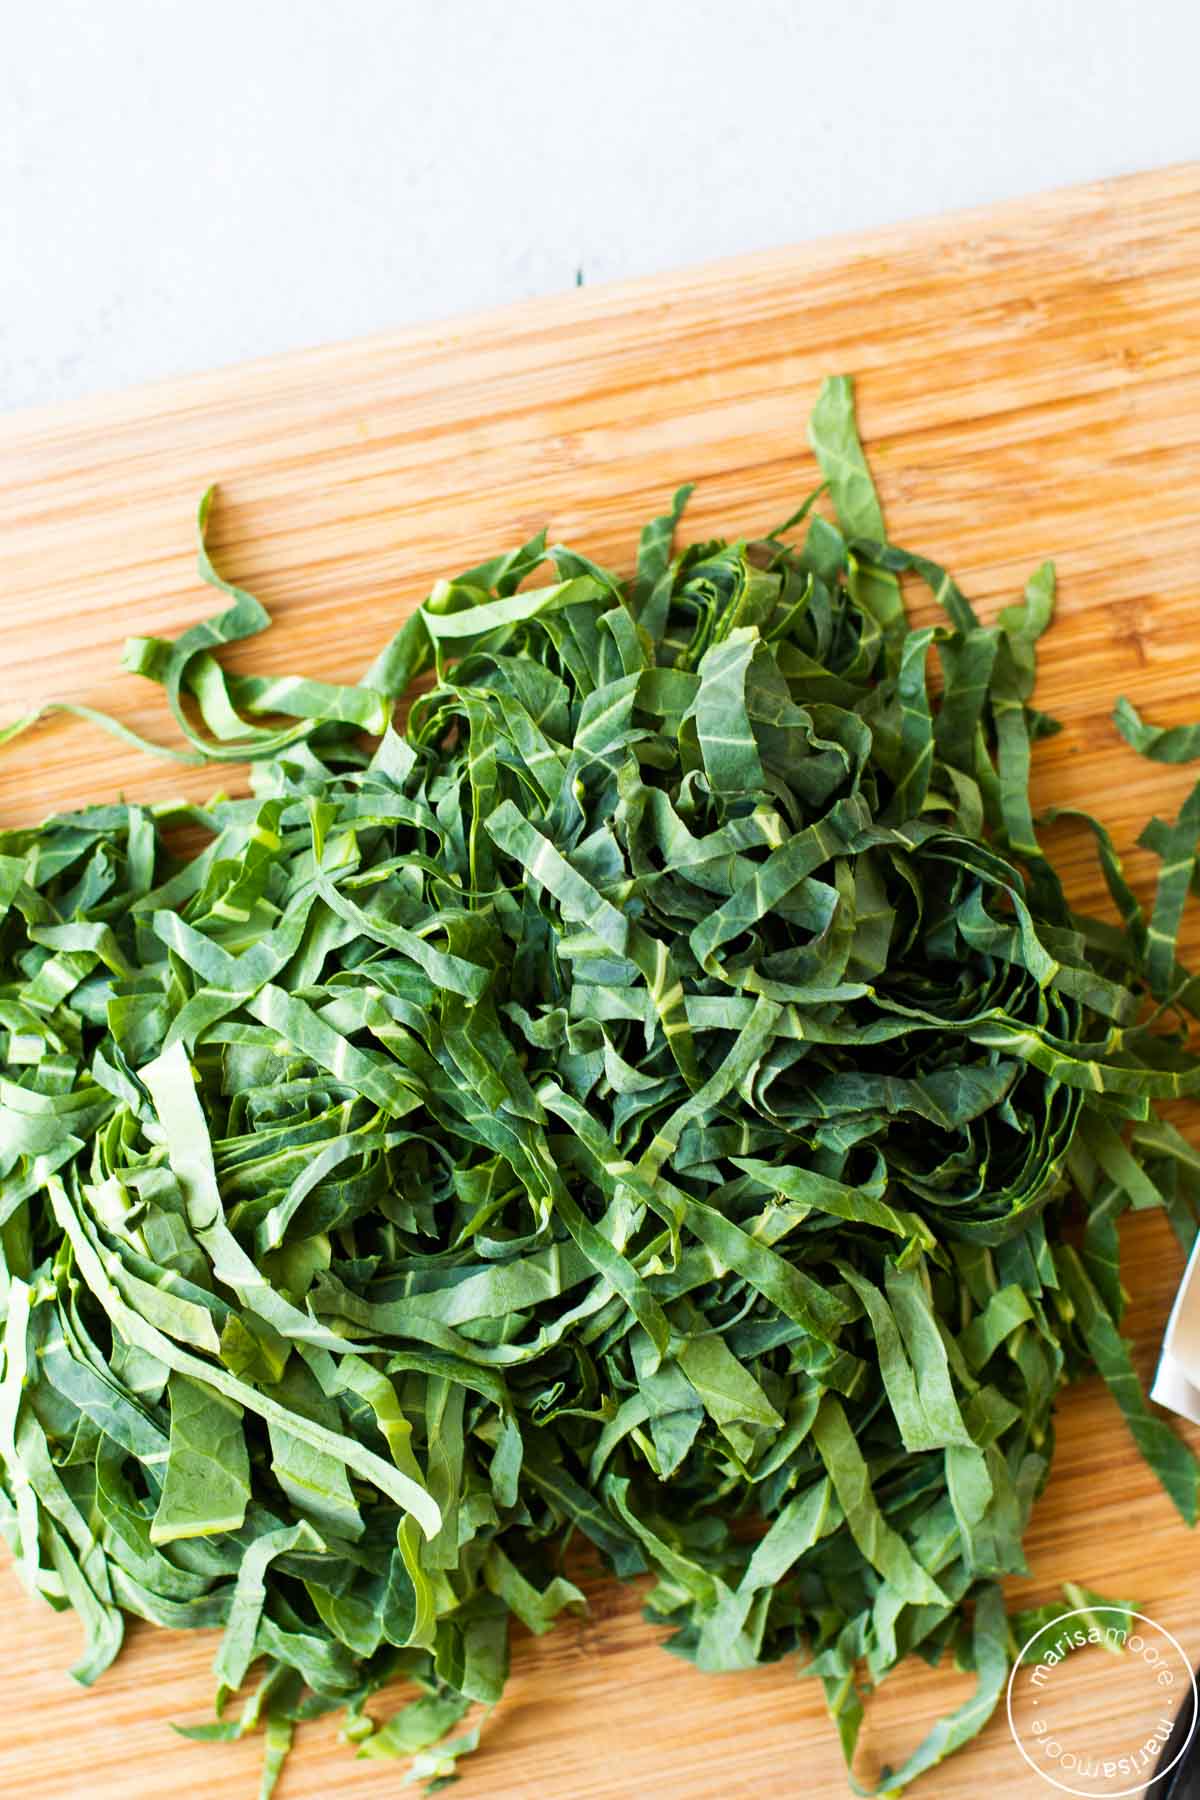 Tips to Keep Fresh-Cut Greens Looking Their Best